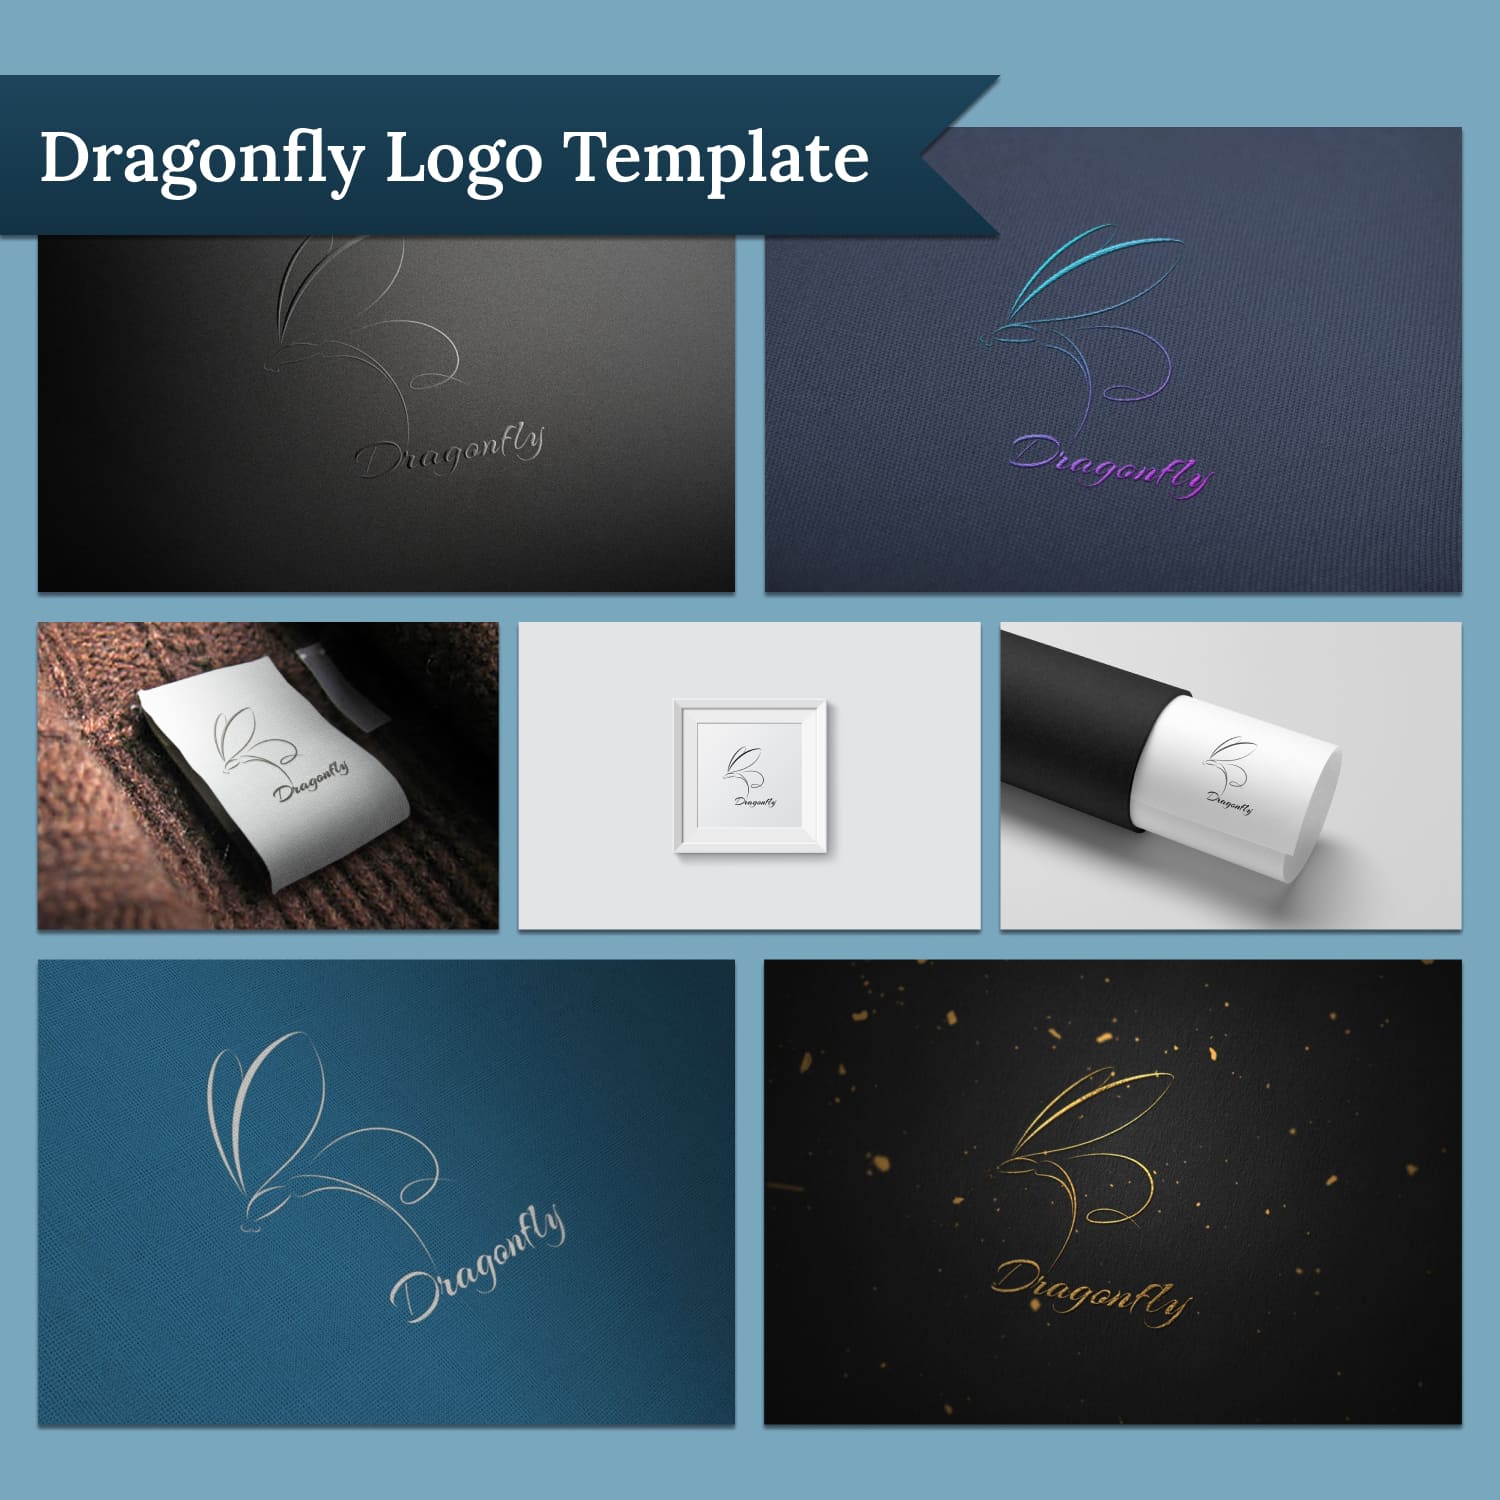 Dragonfly Logo Delicate Design Template cover image.